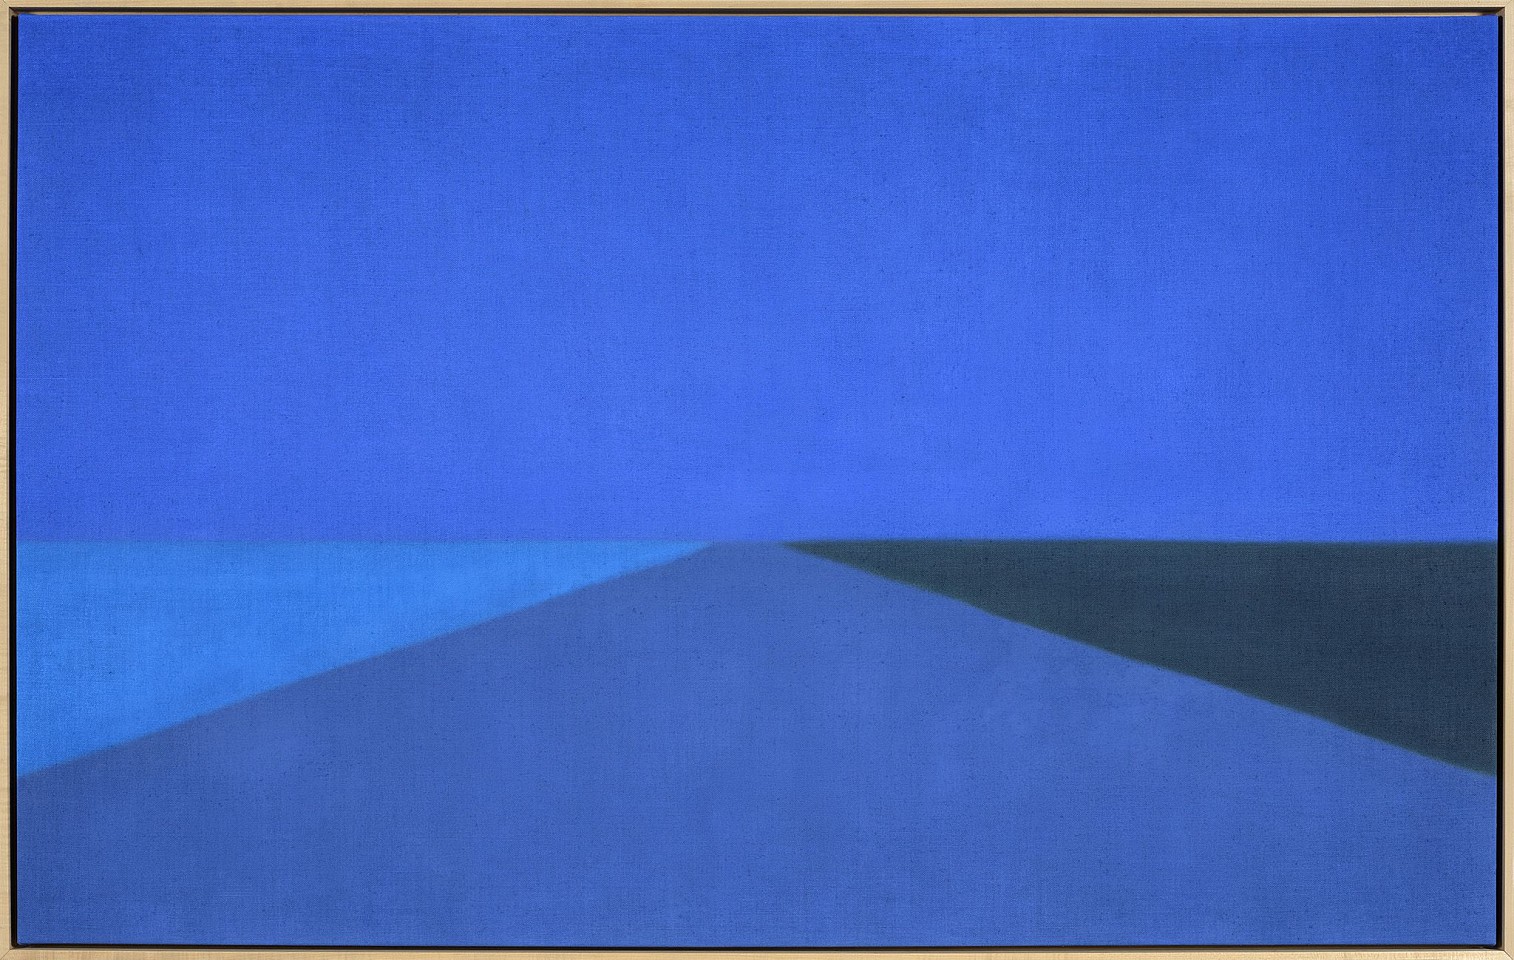 Susan Vecsey, Untitled (Blue Nocturne) | SOLD, 2023
Oil on linen, 48 x 76 in. (121.9 x 193 cm)
VEC-00247